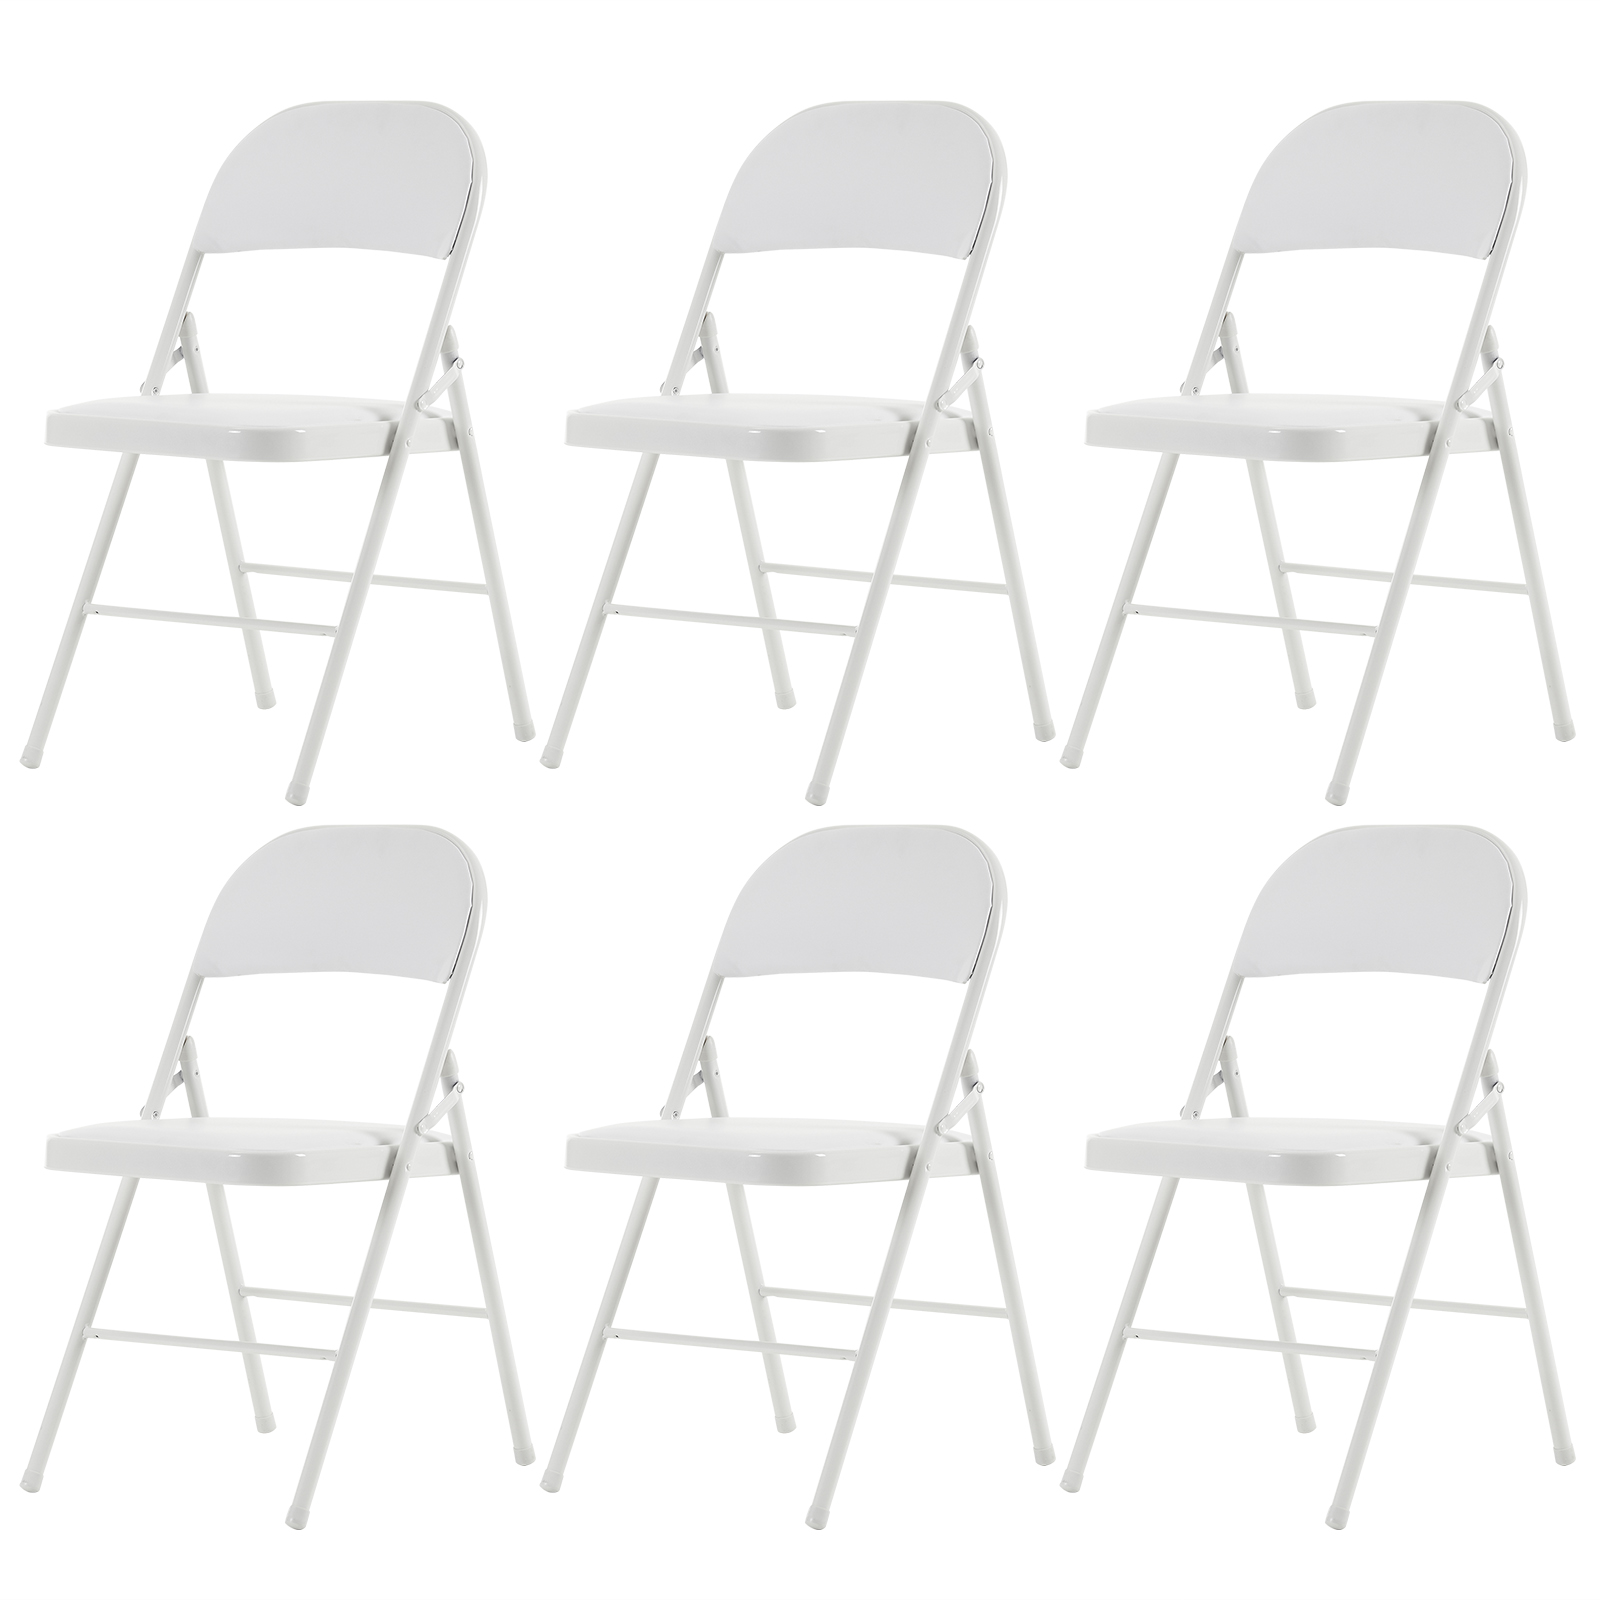 UBesGoo Set of 12 Padded Folding Chair Portable Dining Chairs Heavy Duty Party Chairs with Metal Frame White - image 5 of 10